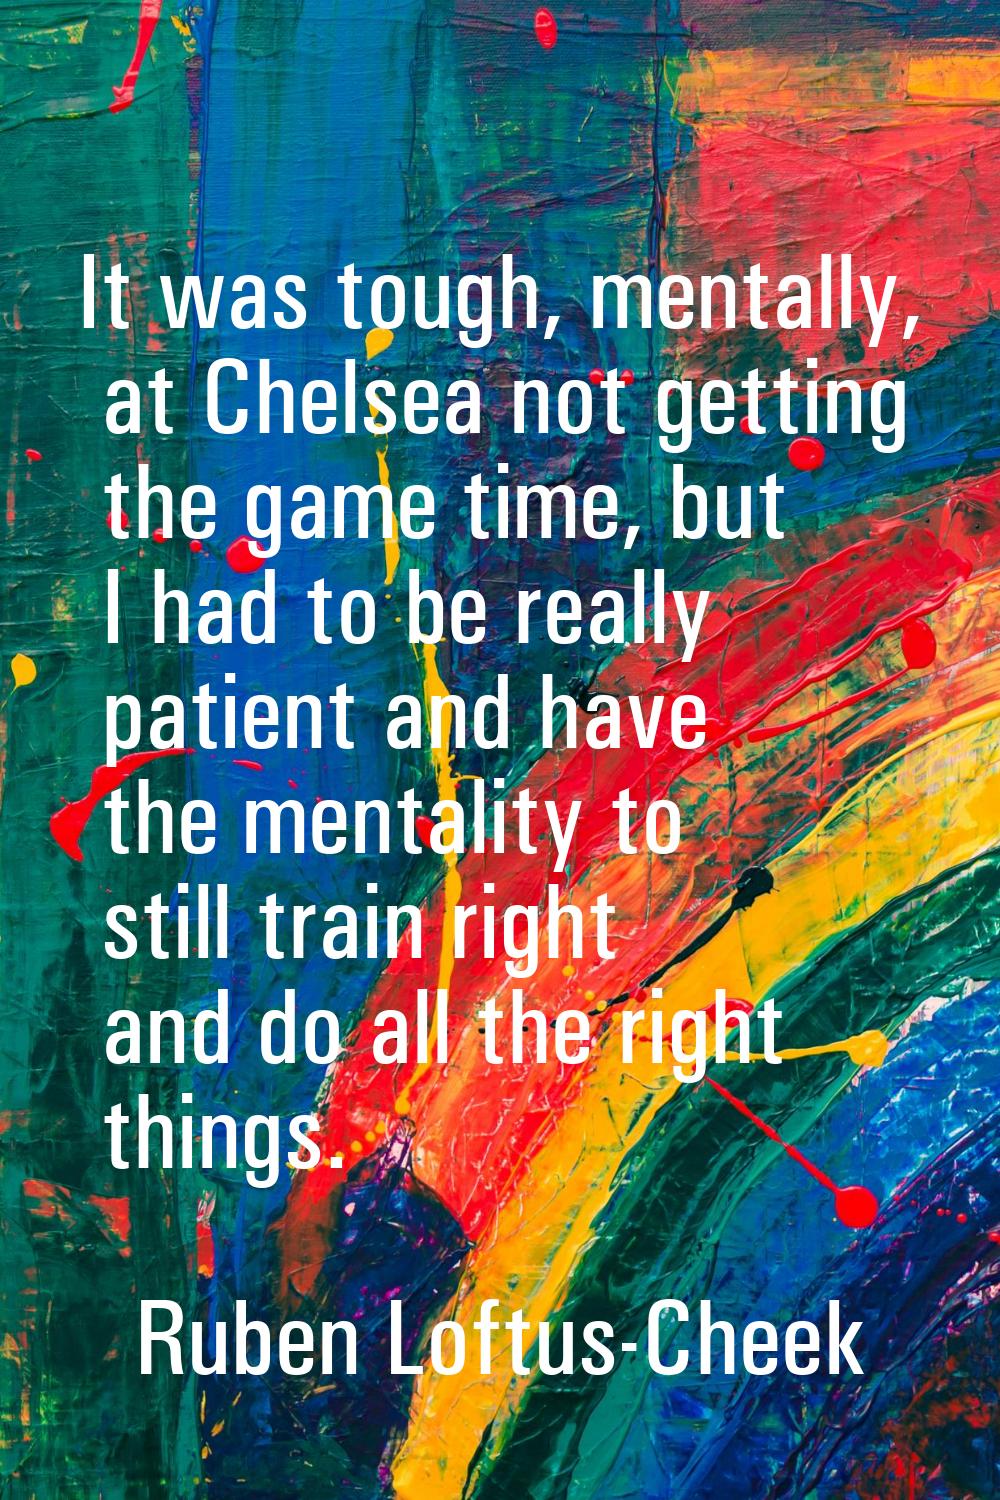 It was tough, mentally, at Chelsea not getting the game time, but I had to be really patient and ha